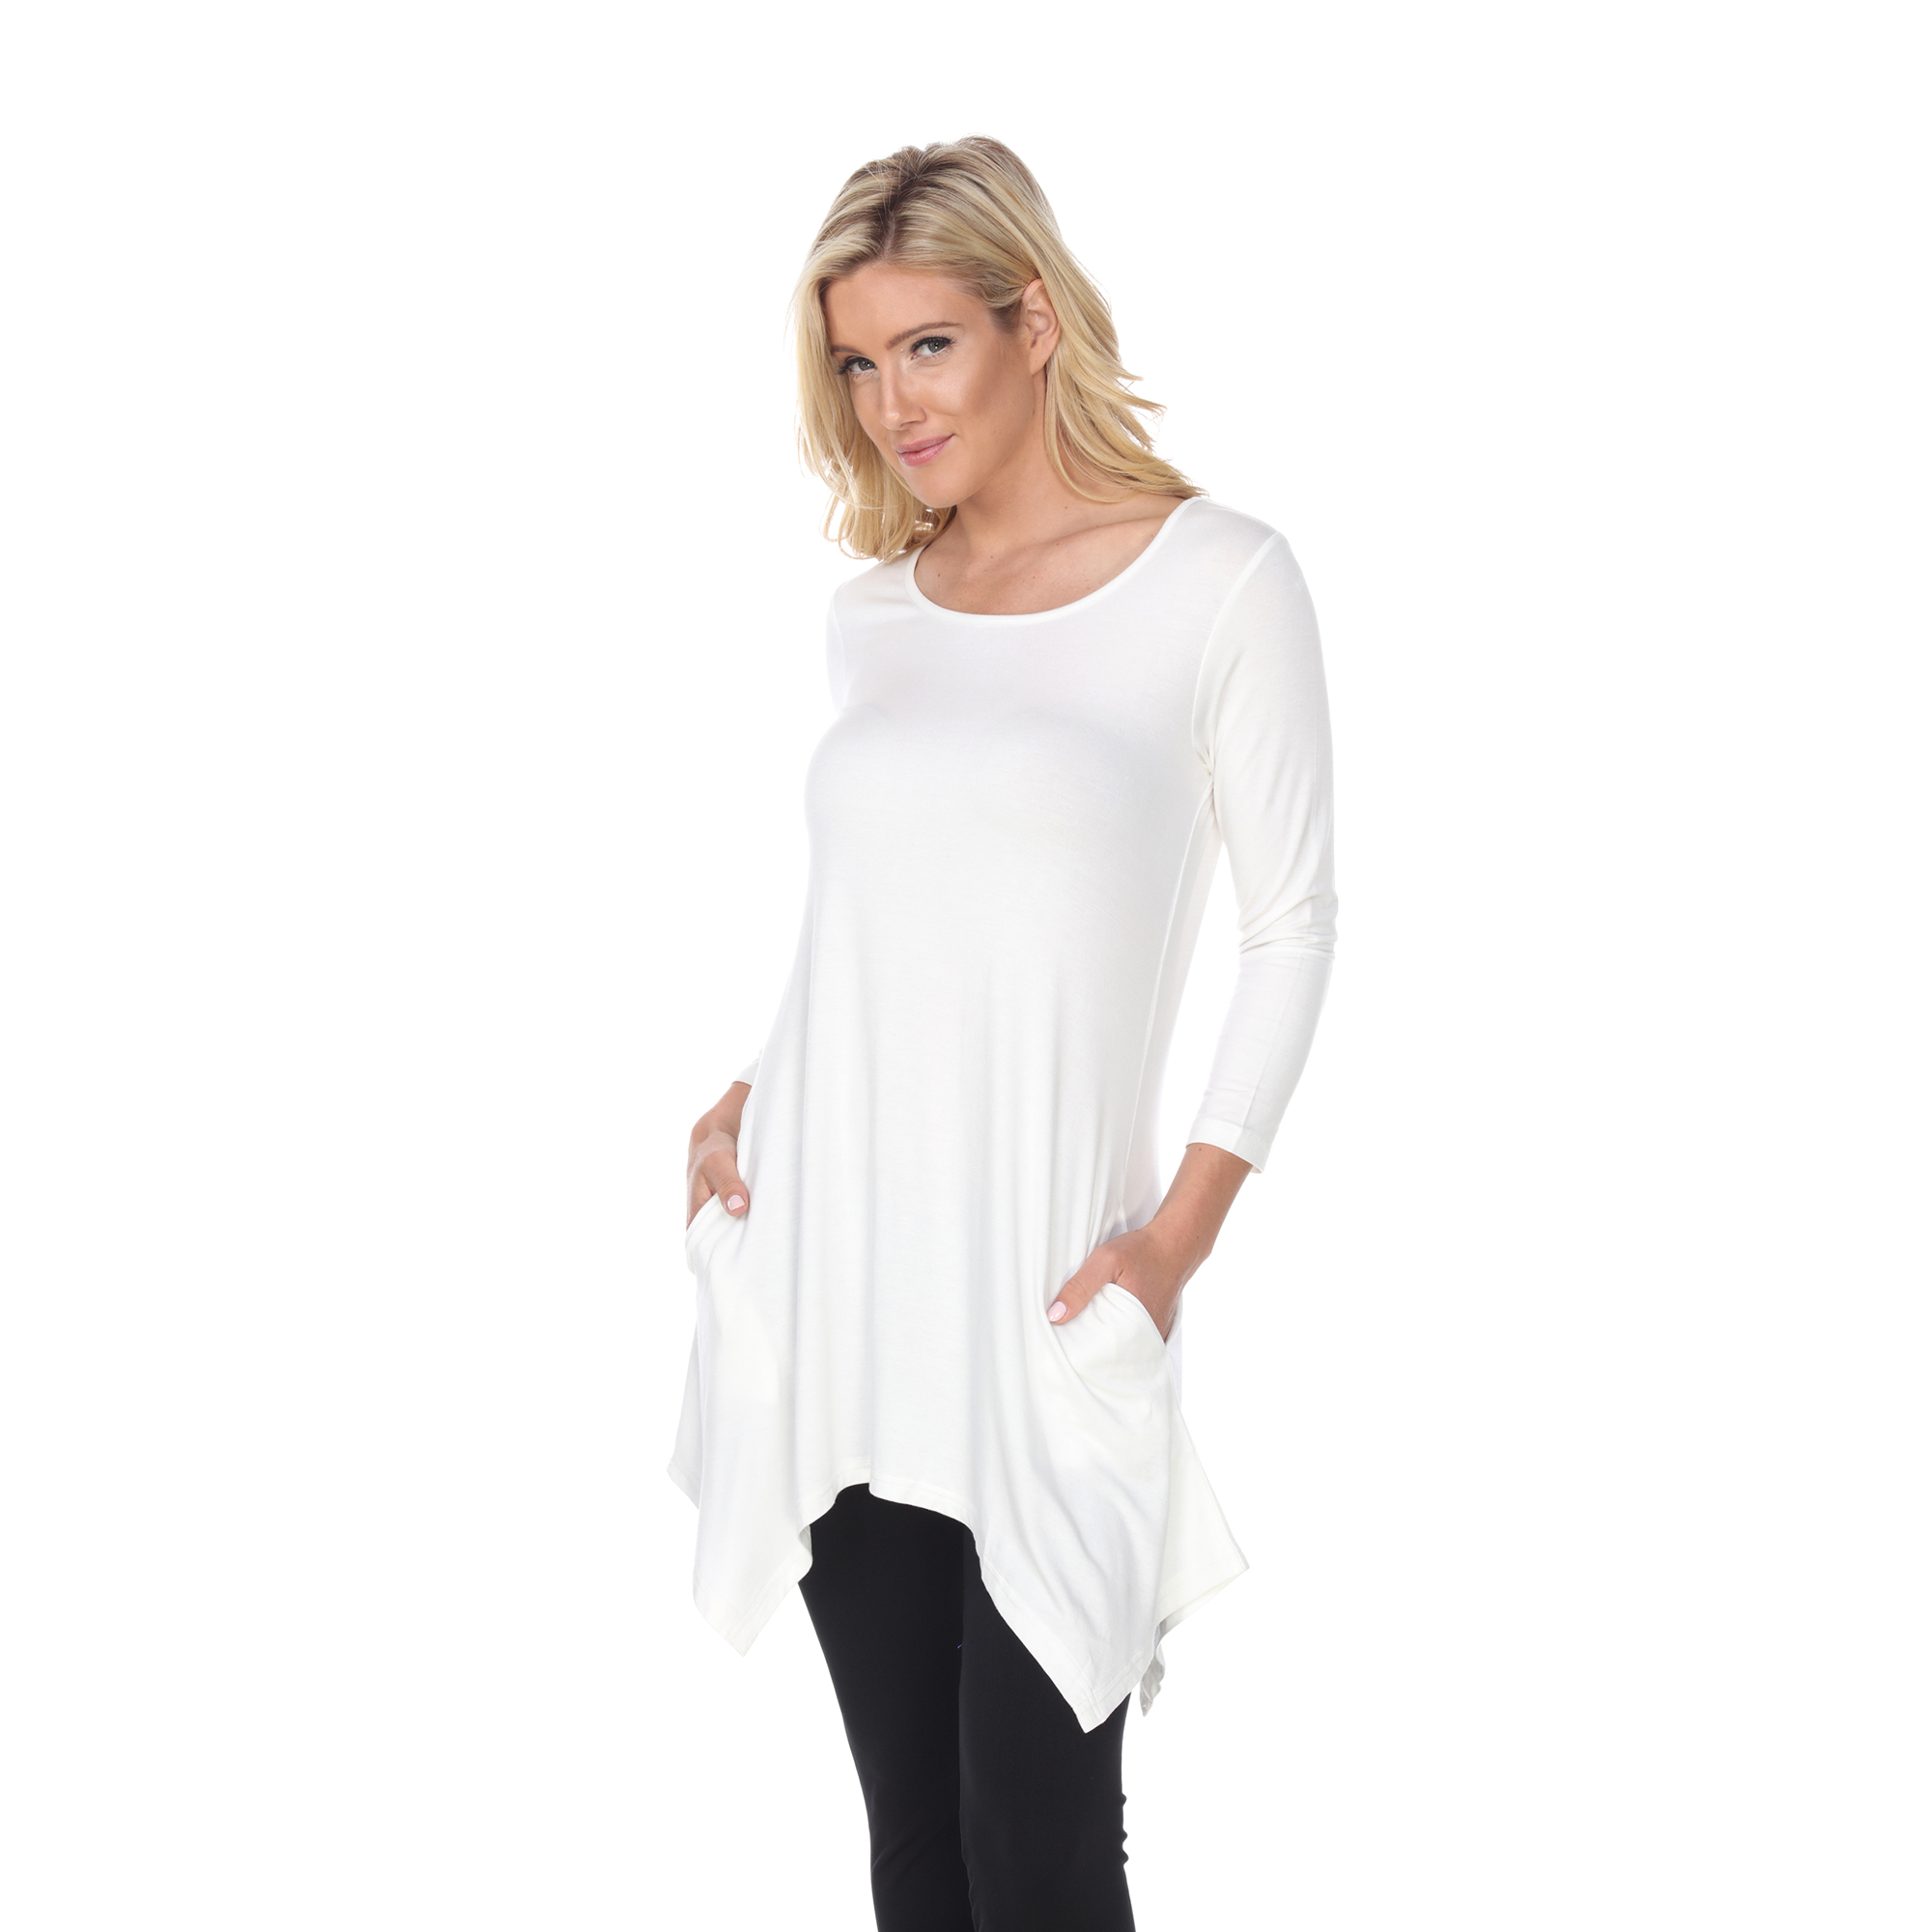 White Mark Women's Quarter Sleeve Tunic Top With Pockets - White, 5X